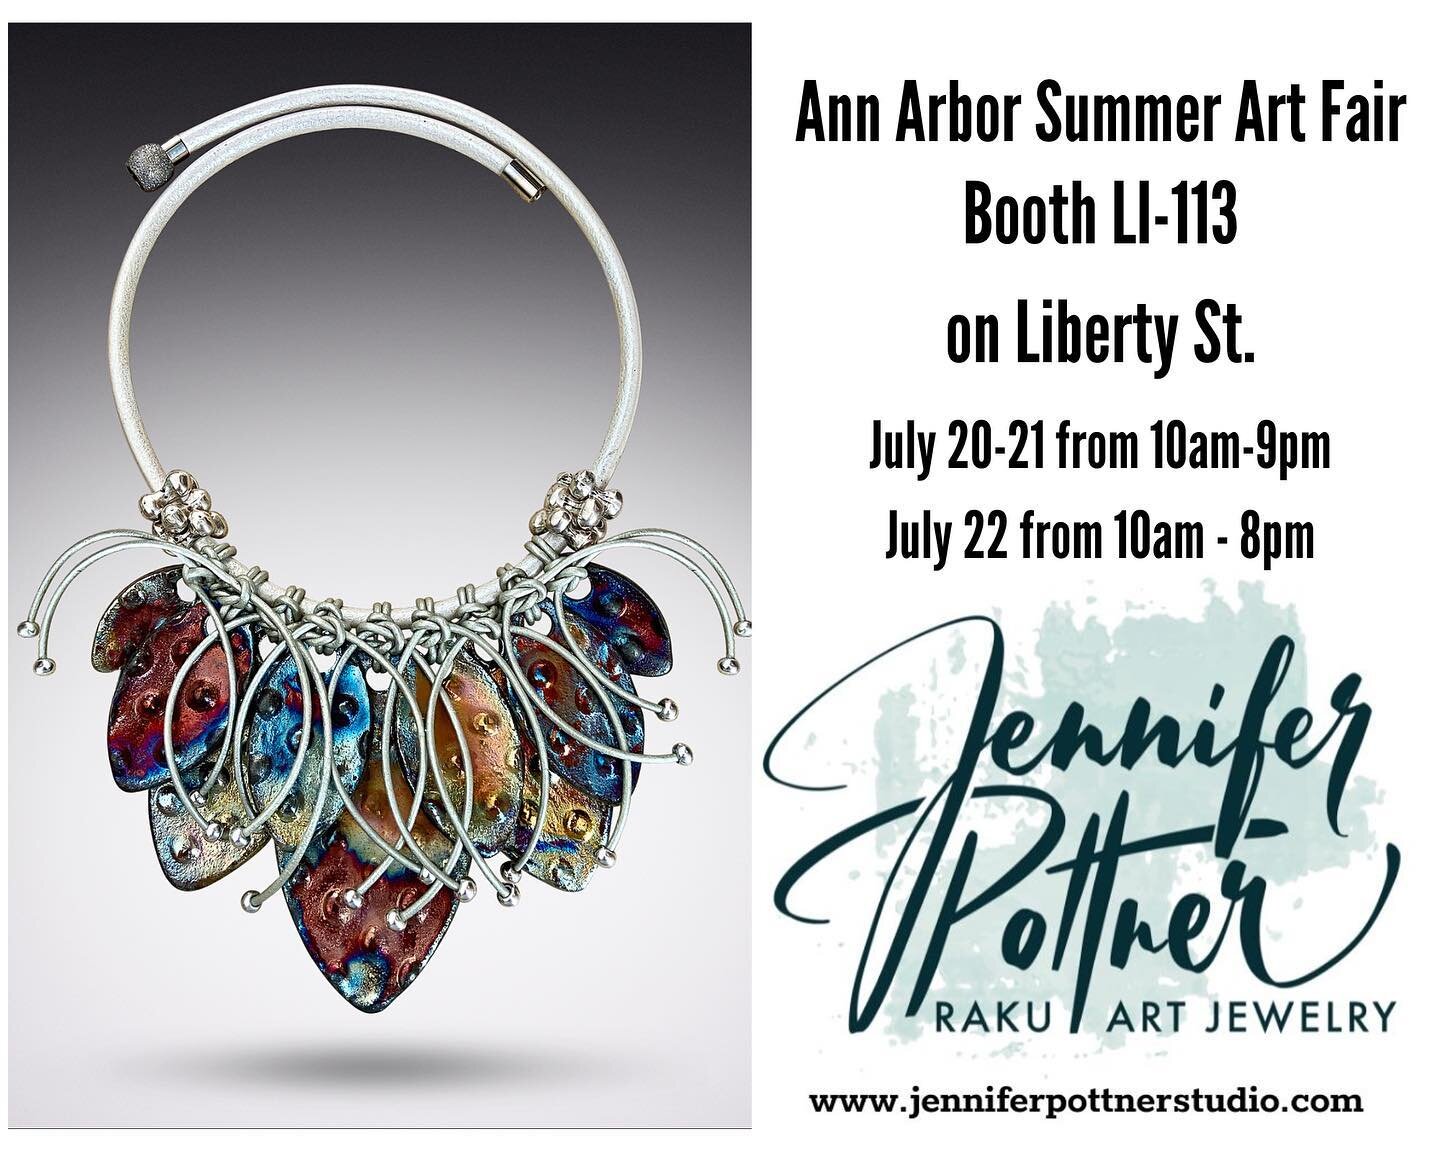 It&rsquo;s time for the #annarborsummerartfair !! Set up is tomorrow.  I have so many new designs that I can&rsquo;t wait to show you.  See you this Thursday, Friday and Saturday!!
#rakuartjewelry #ceramicjewelry #artistsoninstagram #makersgonnamake